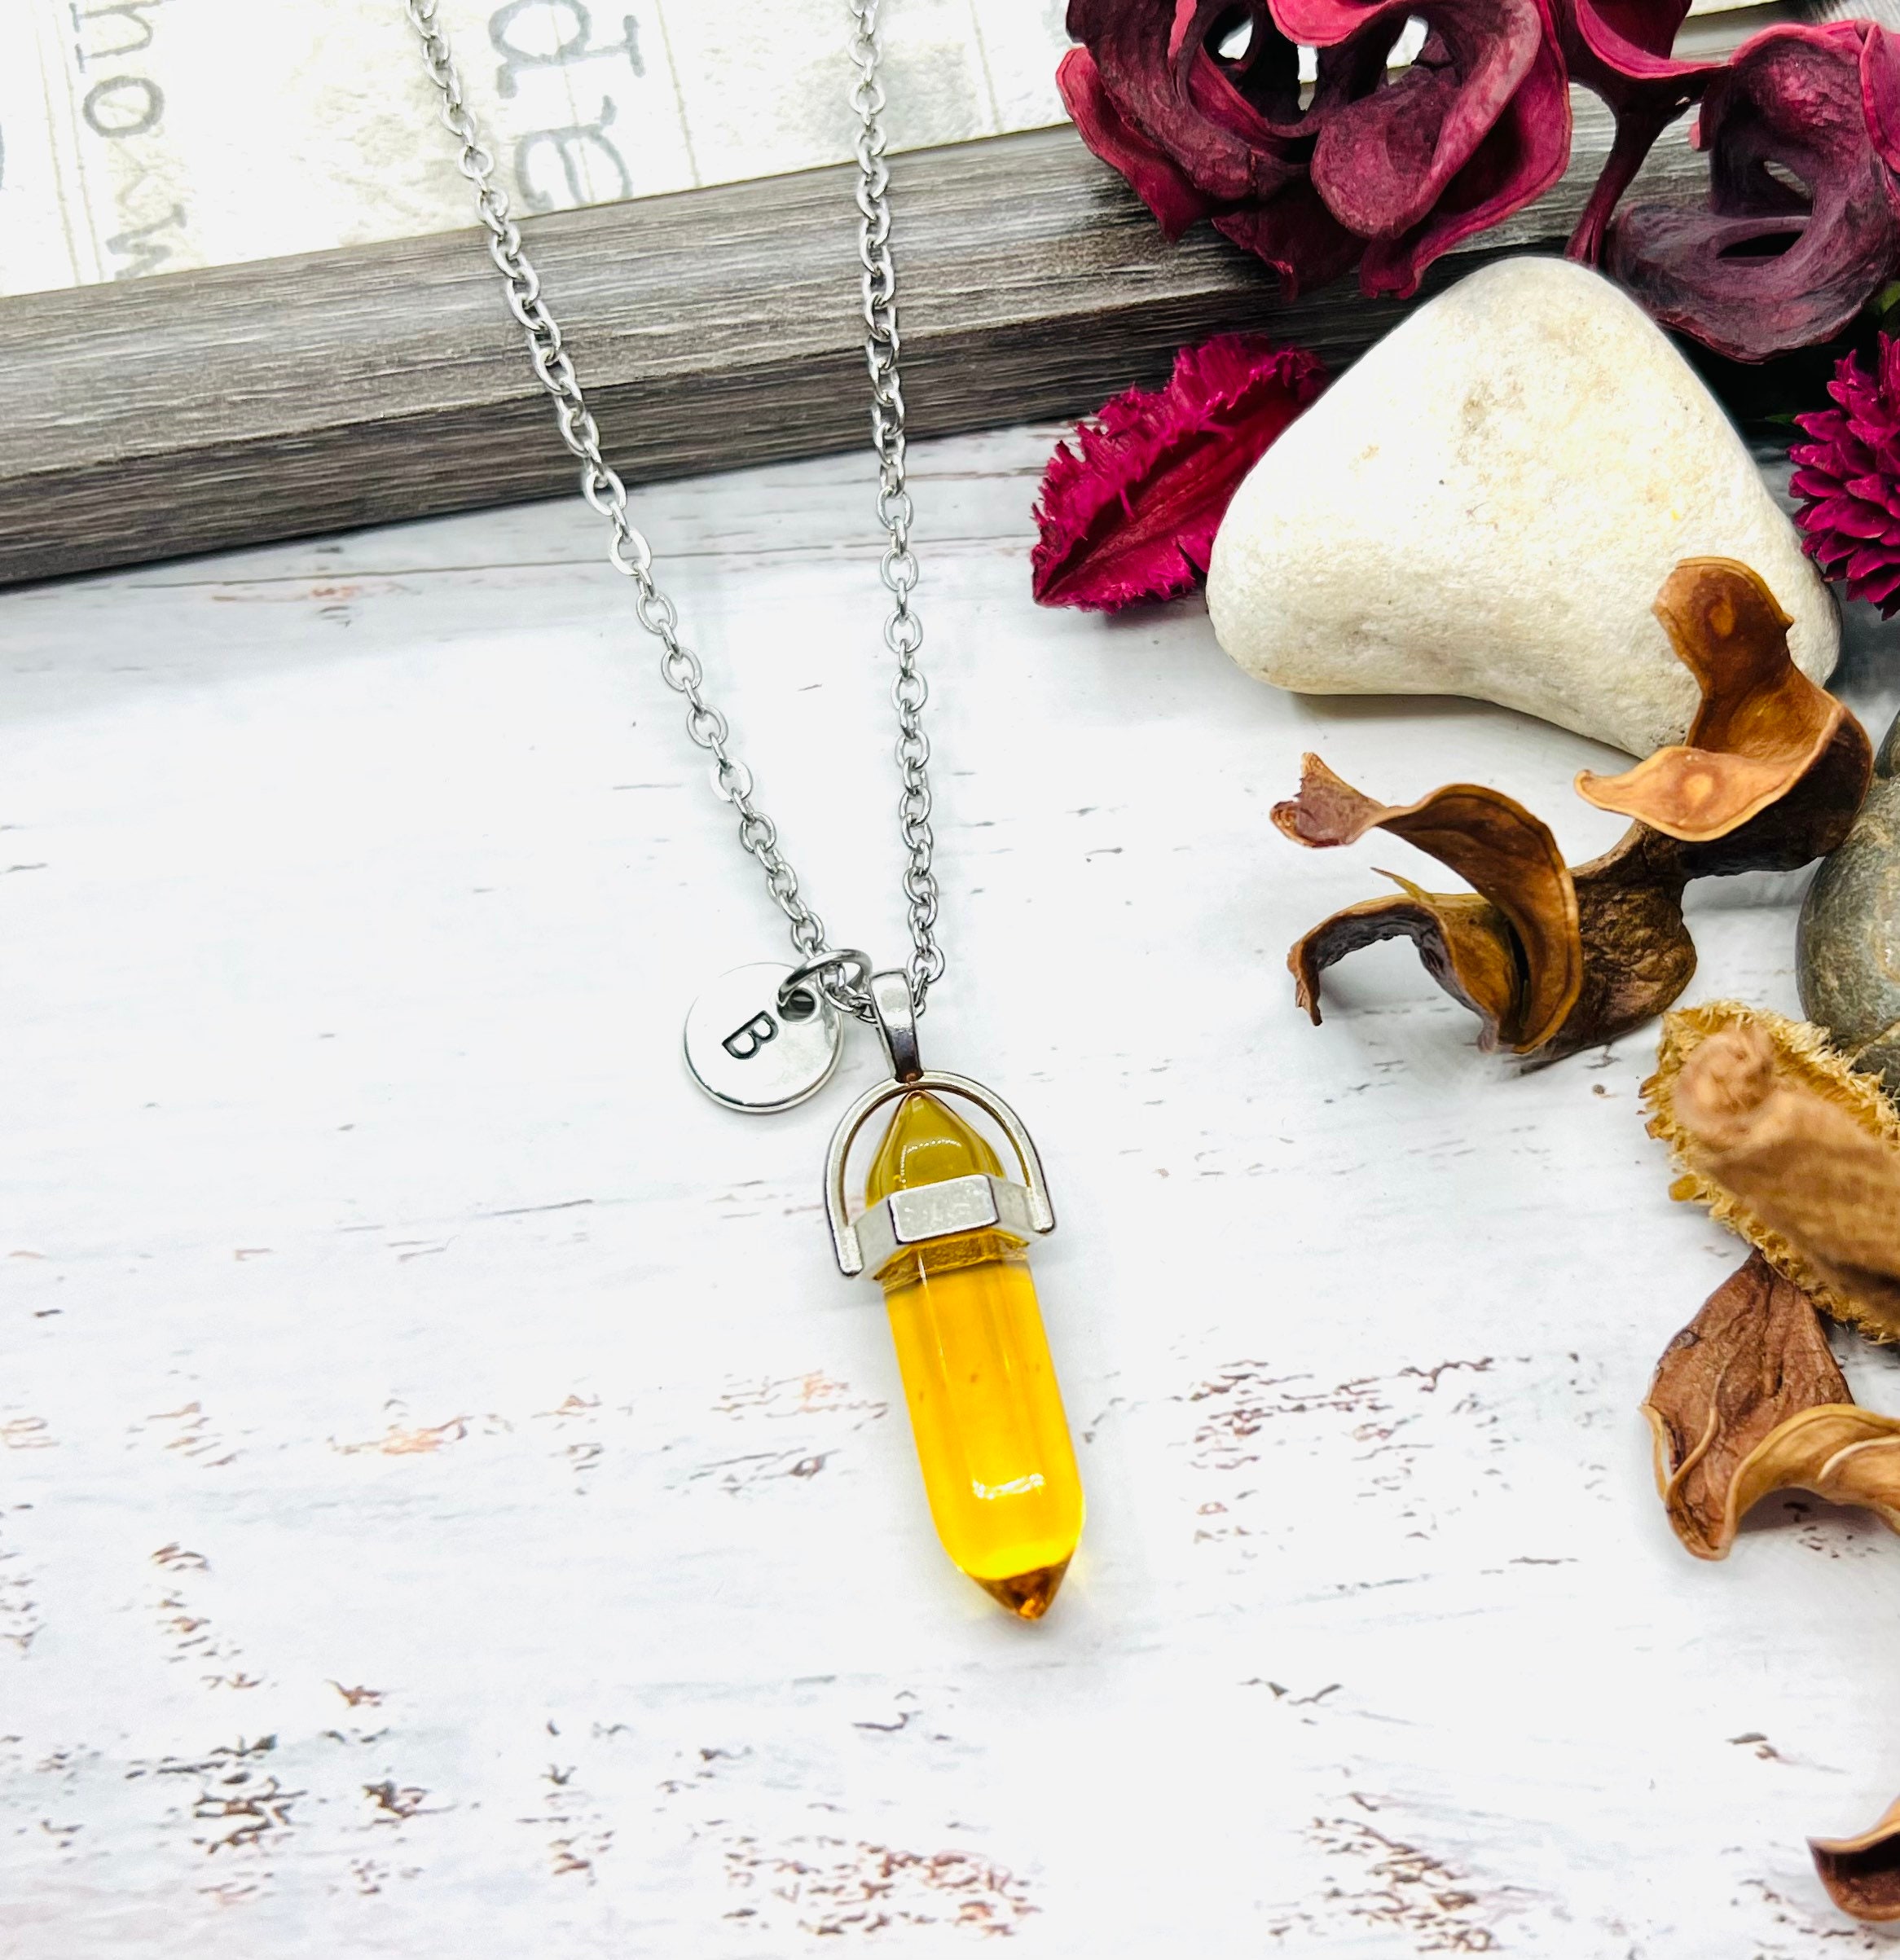 REIKI CRYSTAL PRODUCTS Indian Citrine Pendant Pencil Pendant Crystal Pendant  Pencil Shape Stone Pendant Reiki Healing Pendant With Silver Polish Metal  Chain Healing Stone Pendant With Chain - Yellow Pendant Citrine Crystal